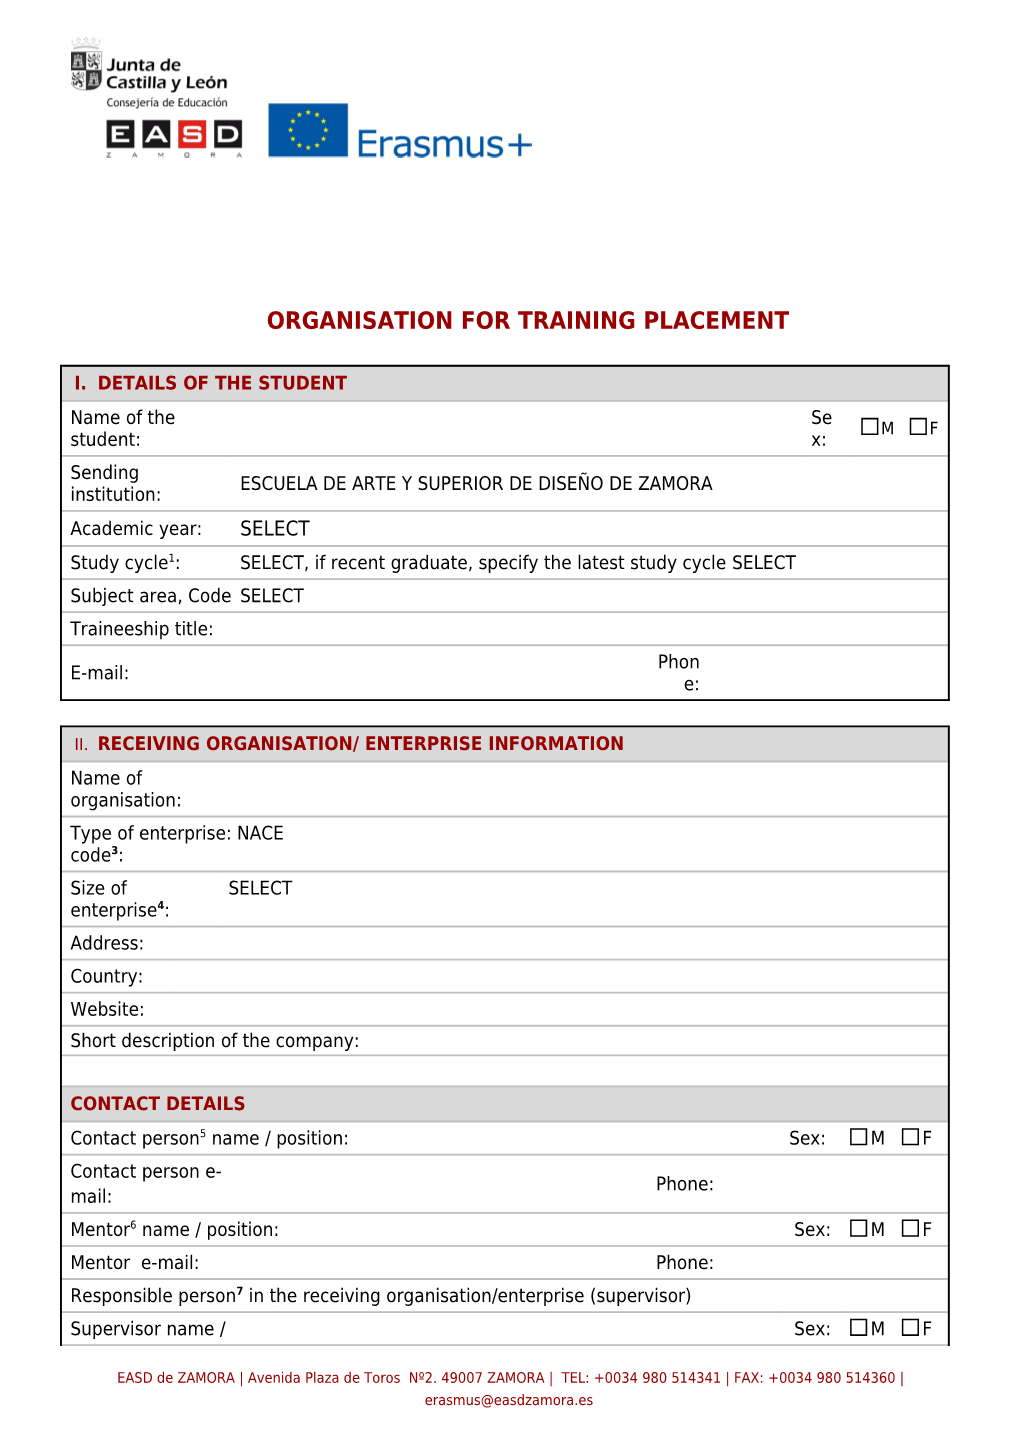 Organisation for Training Placement